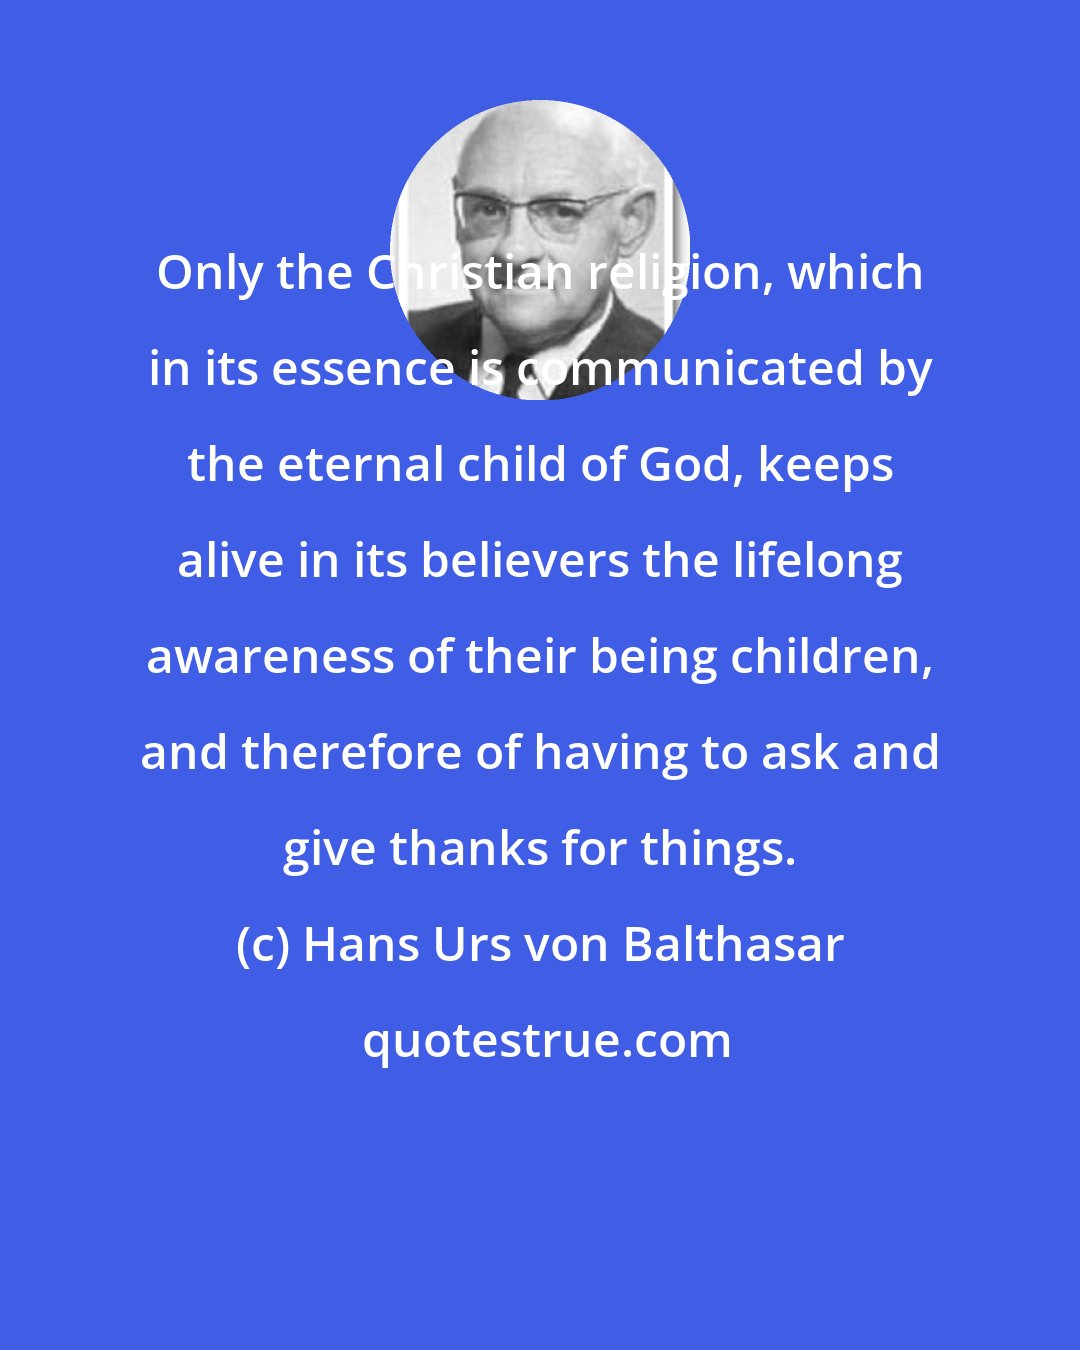 Hans Urs von Balthasar: Only the Christian religion, which in its essence is communicated by the eternal child of God, keeps alive in its believers the lifelong awareness of their being children, and therefore of having to ask and give thanks for things.